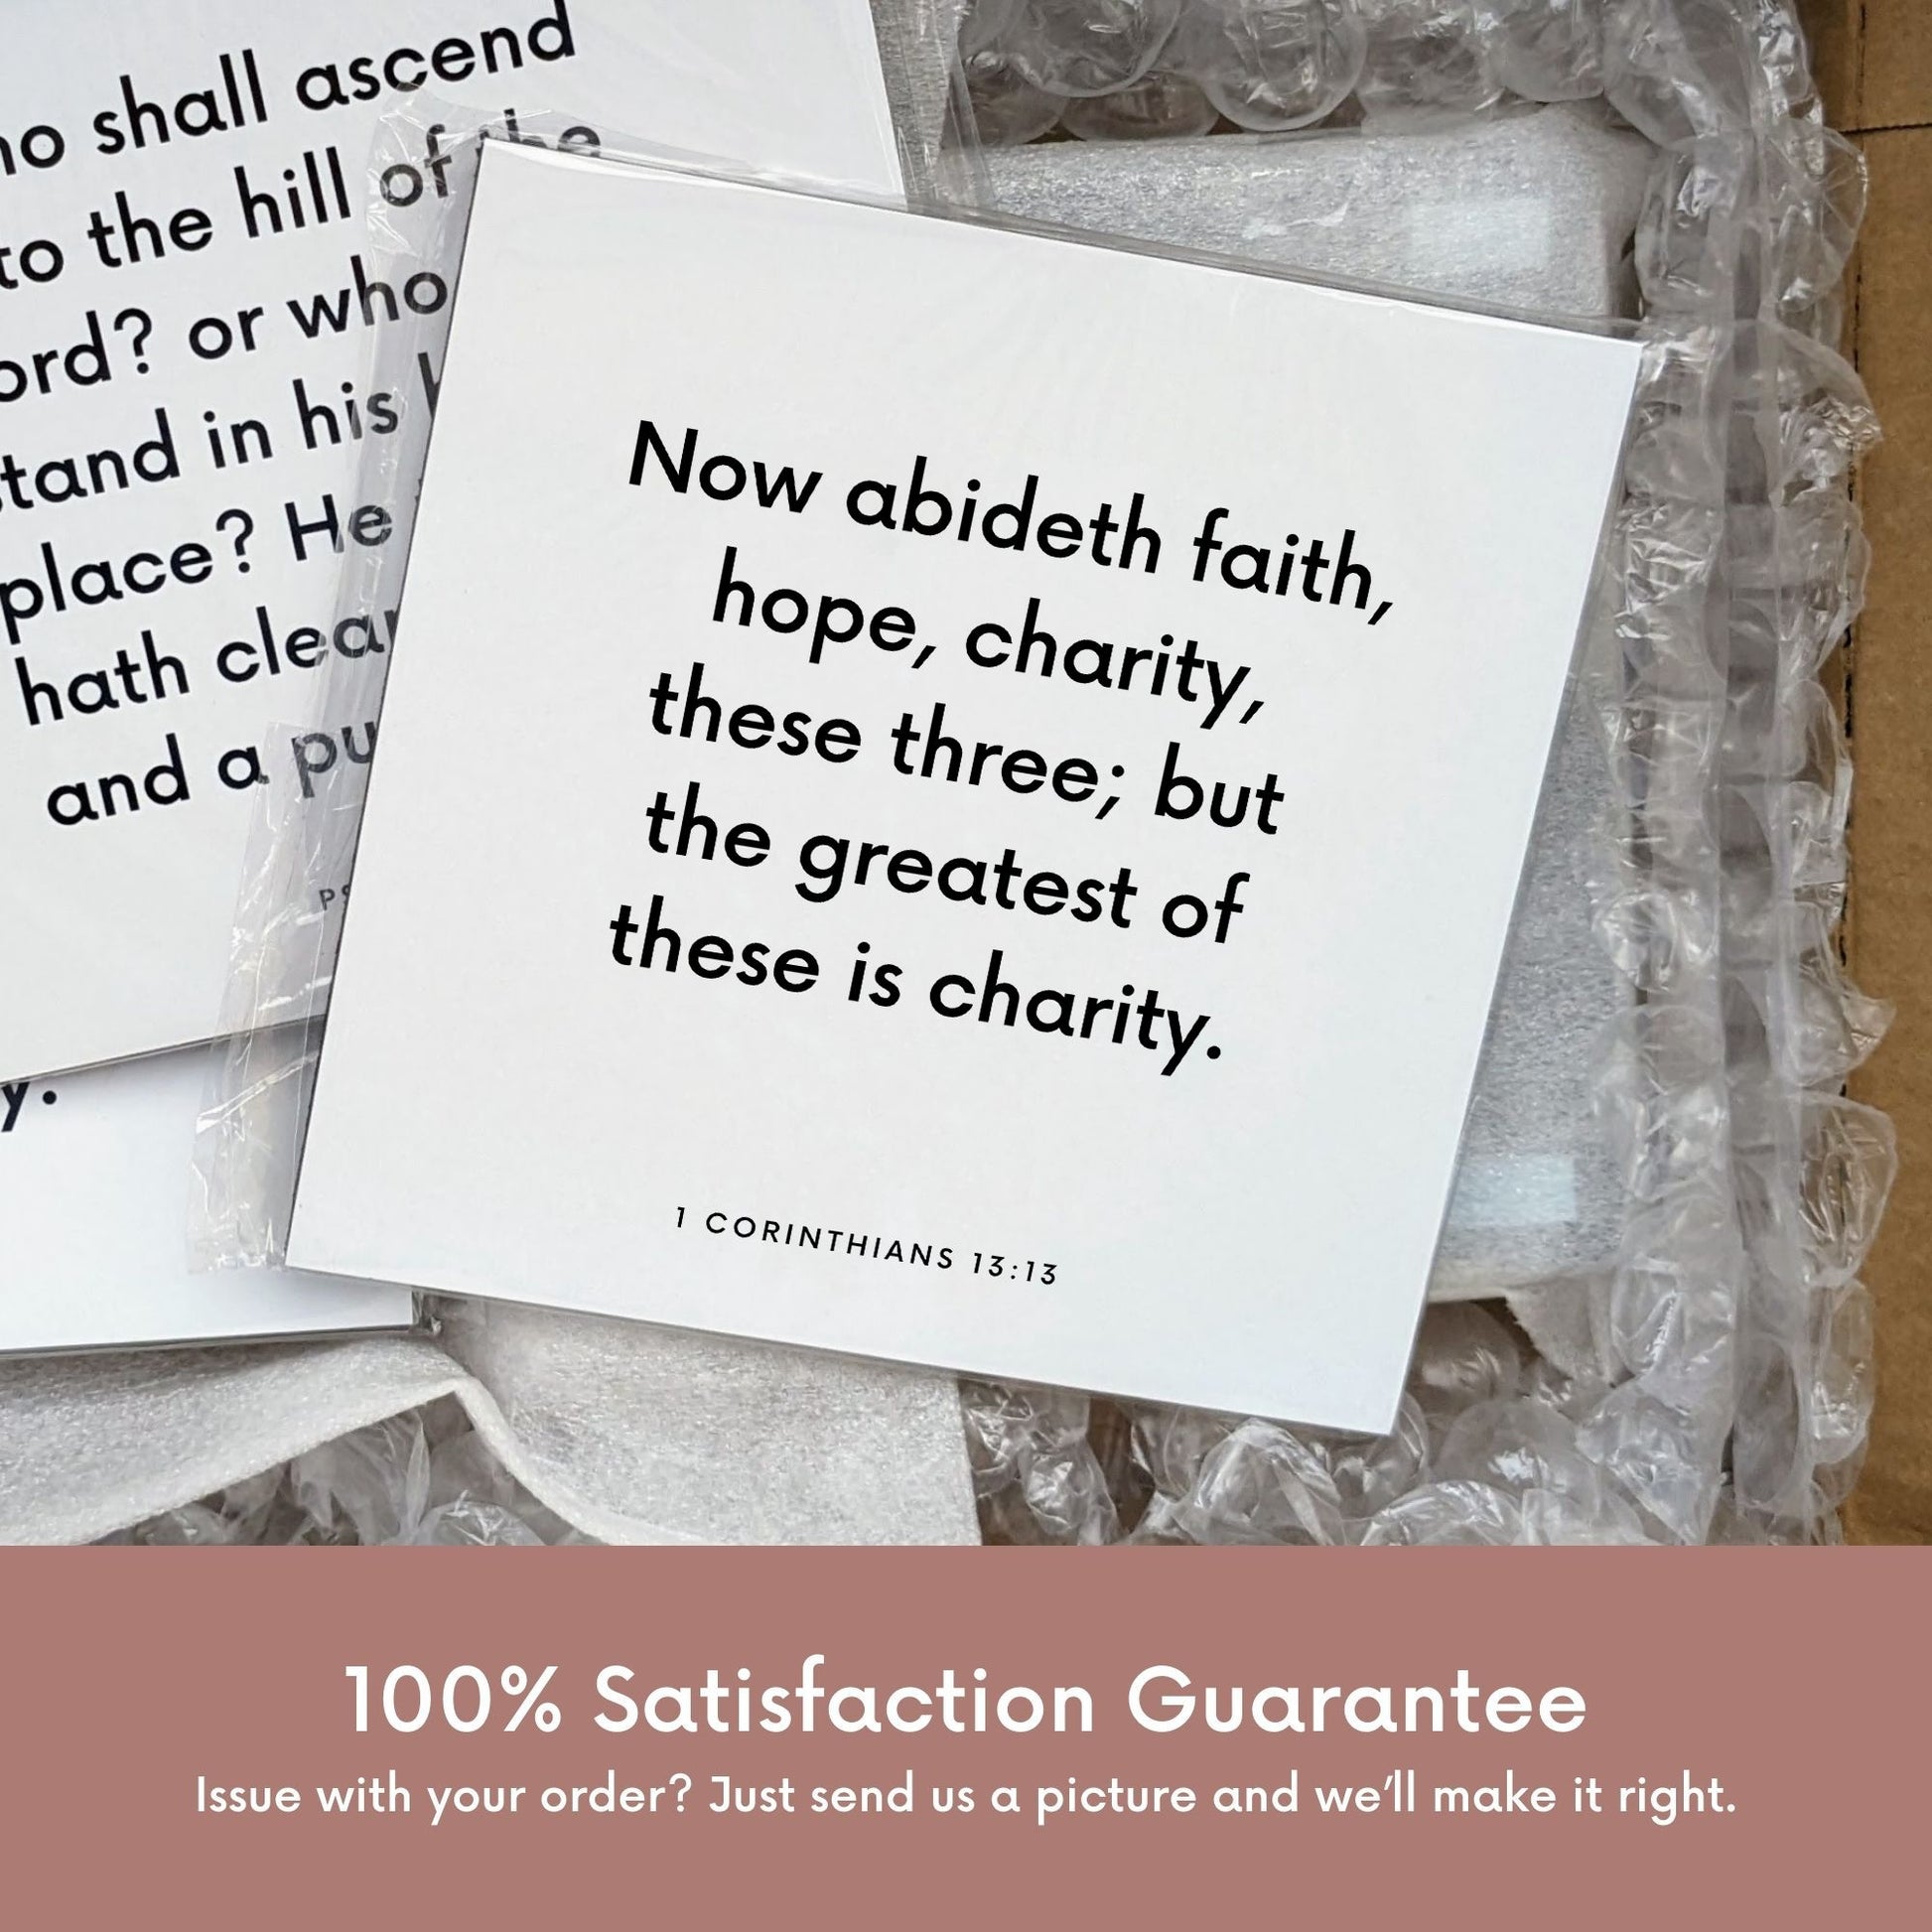 Shipping materials for scripture tile of 1 Corinthians 13:13 - "The greatest of these is charity"